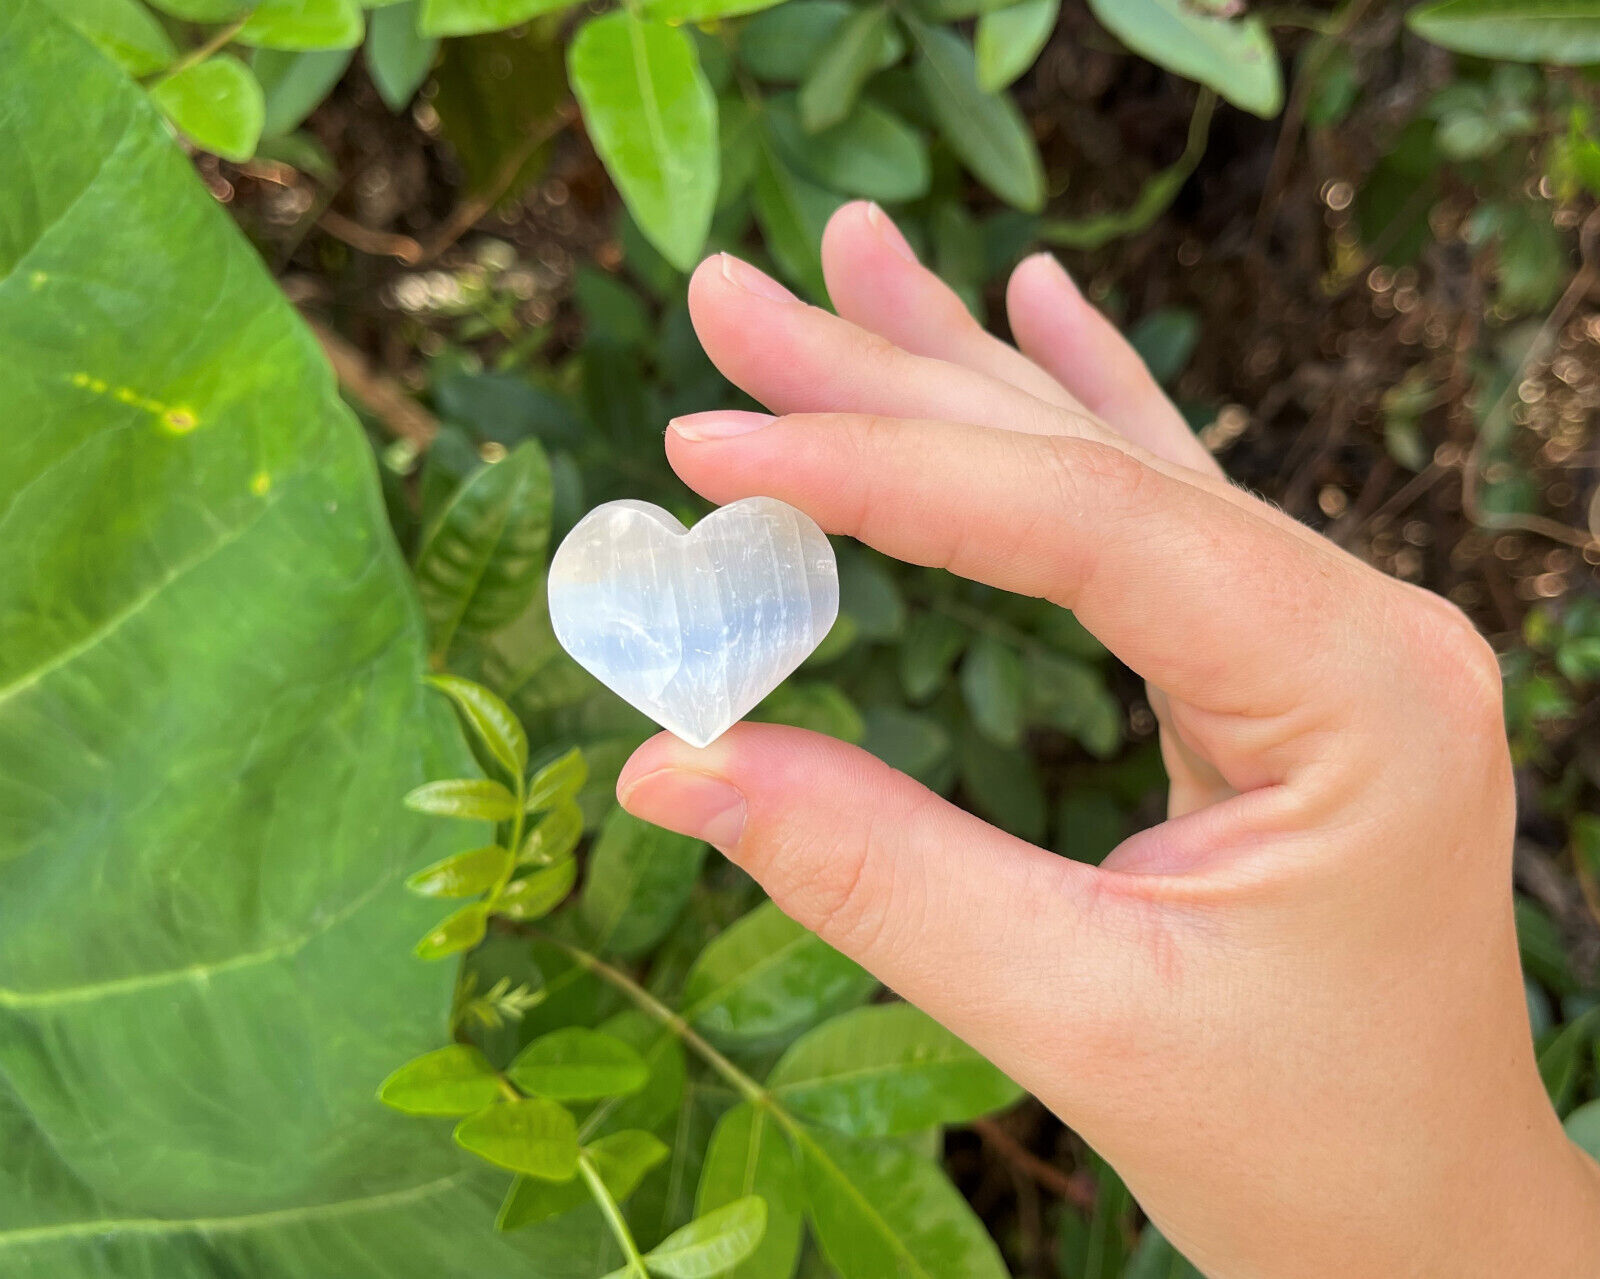 Polished Selenite Crystal Heart - Small, Large or Extra LARGE (Selenite Heart)